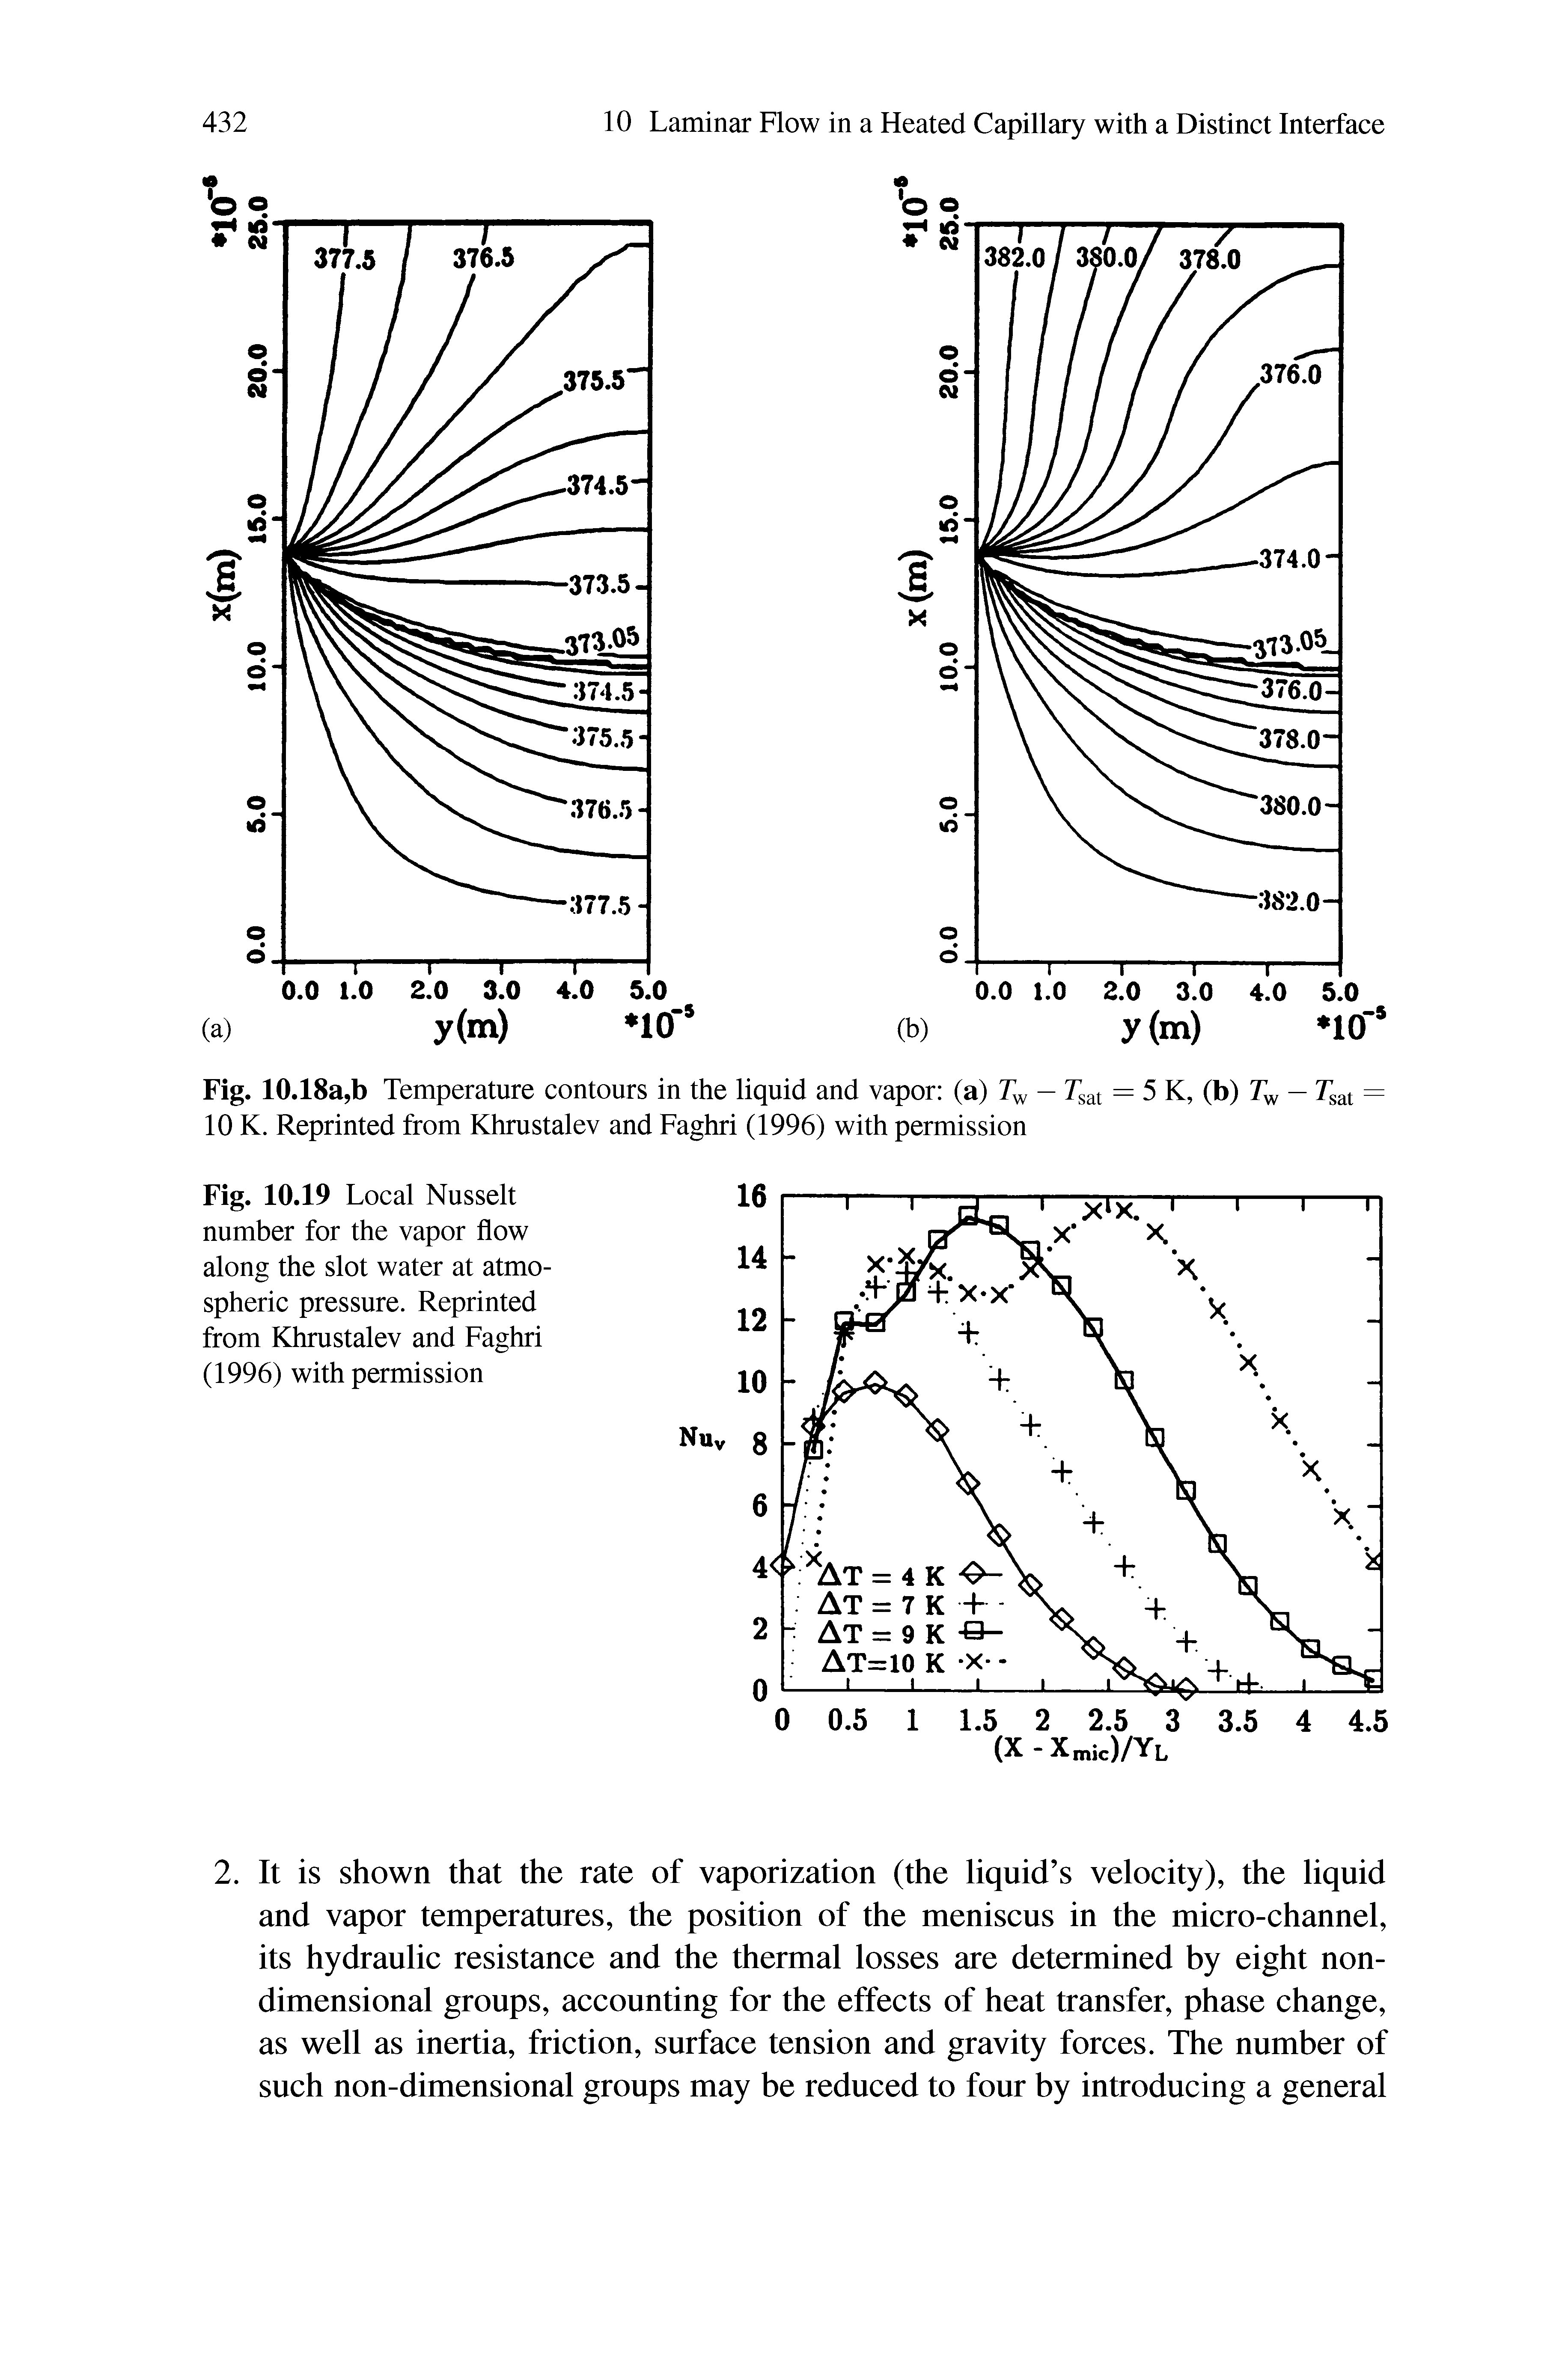 Fig. 10.19 Local Nusselt number for the vapor flow along the slot water at atmospheric pressure. Reprinted from Khrustalev and Faghri (1996) with permission...